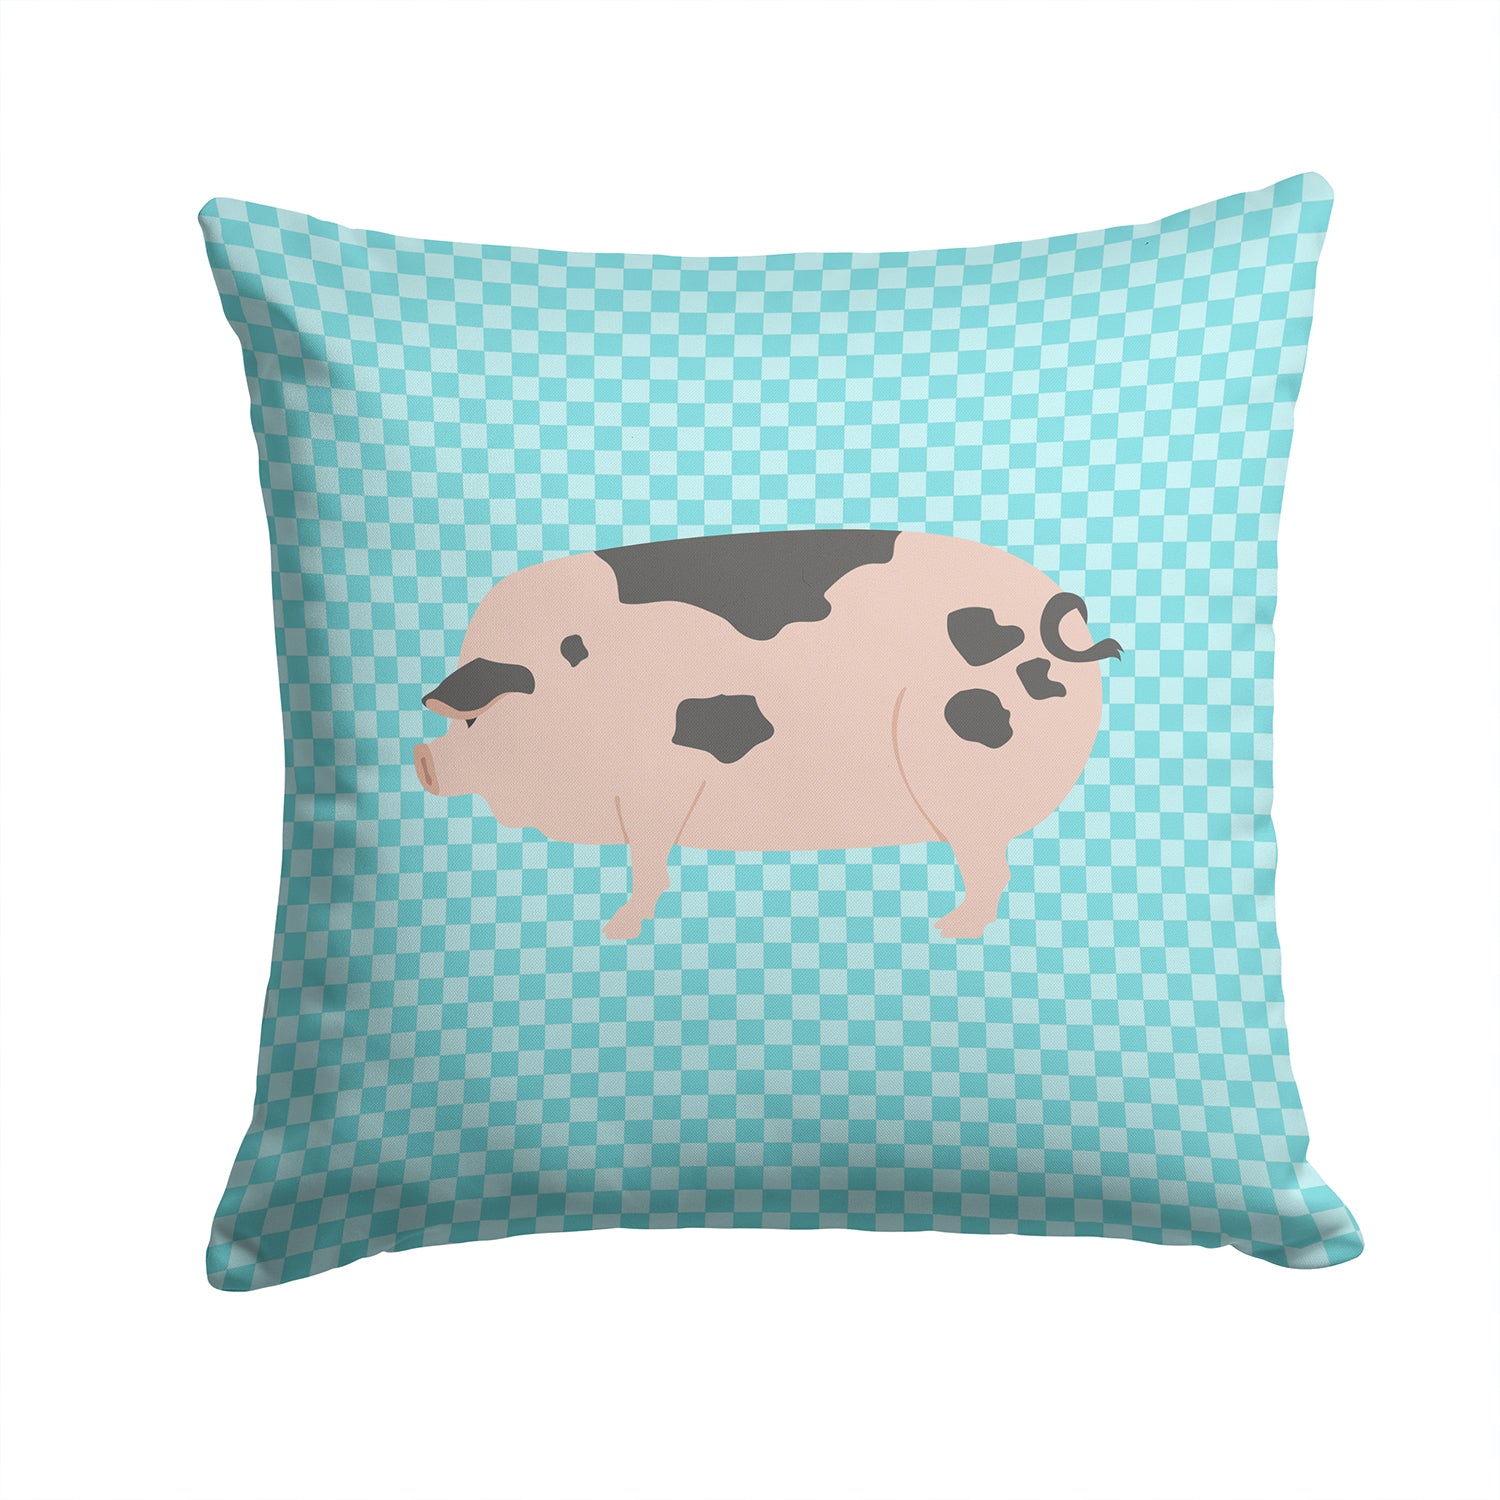 Gloucester Old Spot Pig Blue Check Fabric Decorative Pillow BB8114PW1414 - the-store.com